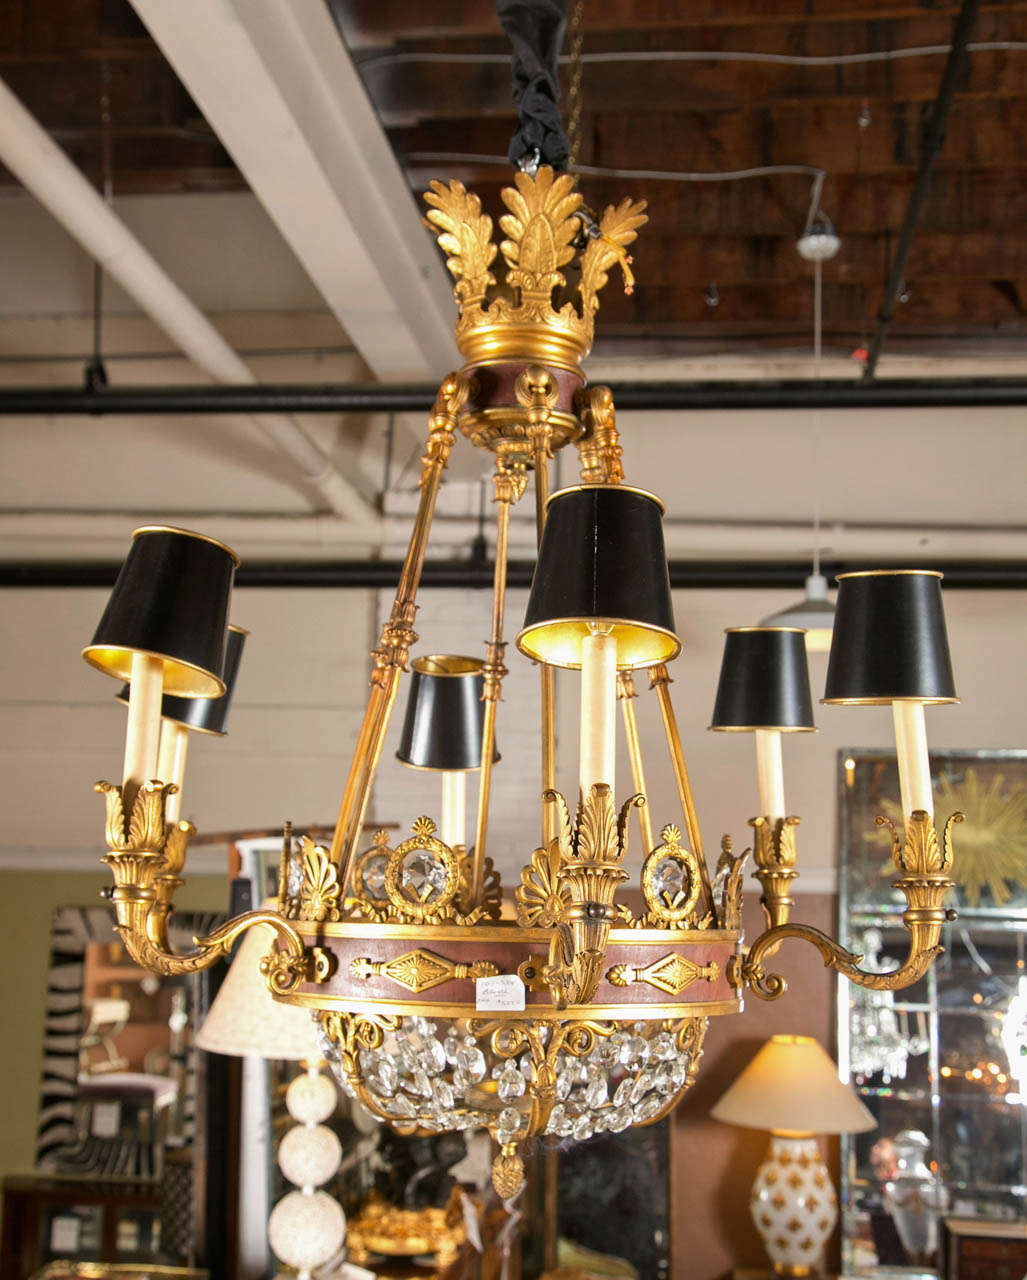 A finely cast six light French Empire Chandelier. The lower crystal and bronze basket supported by a bronze and brown metal apron having six arms with lights.